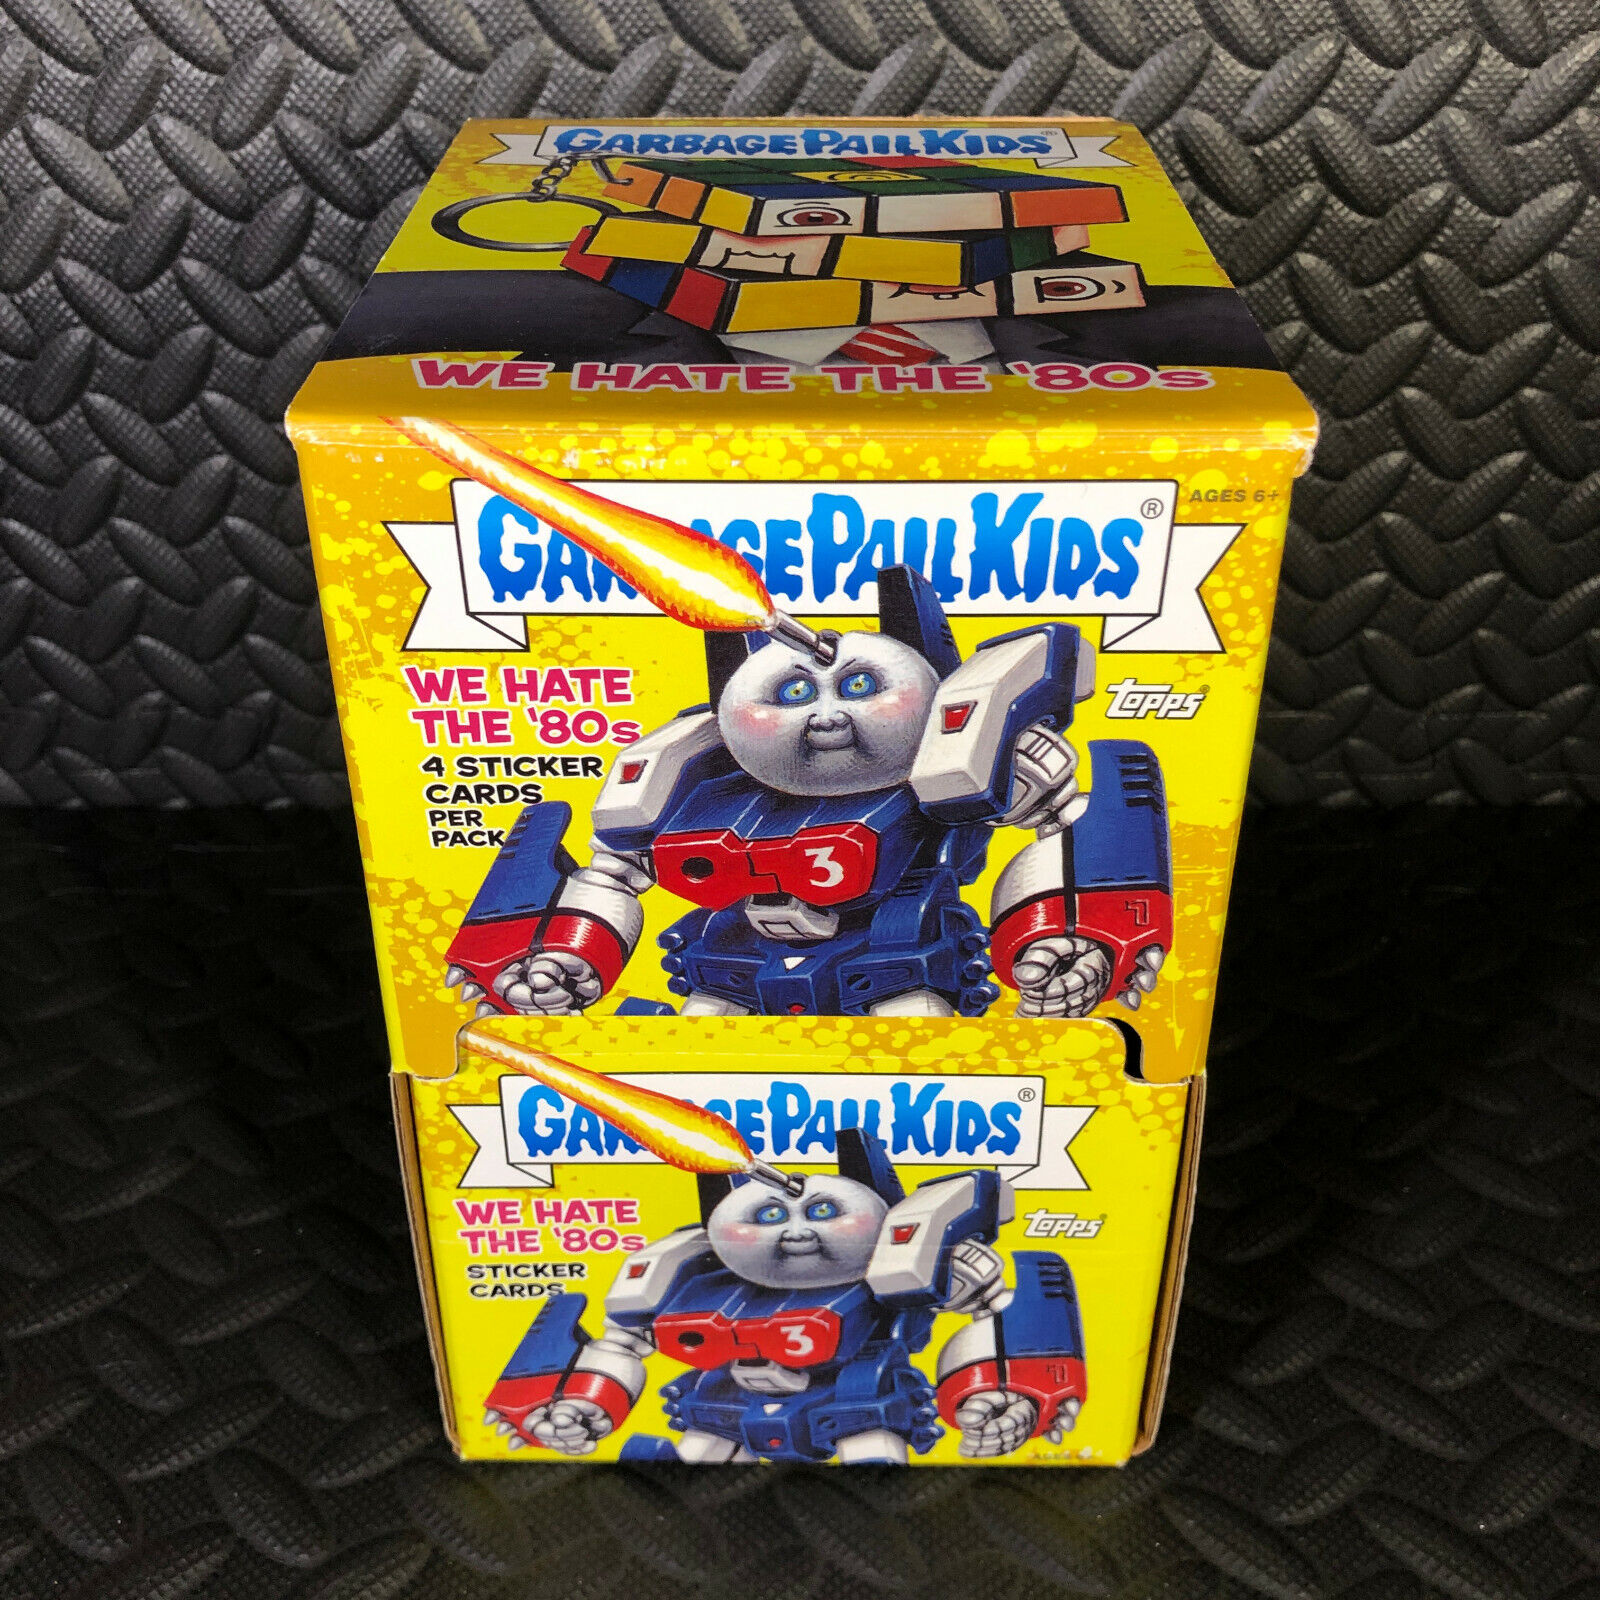 GARBAGE PAIL KIDS 2018 WE HATE THE 80s EMPTY GRAVITY FEED BOX [DOLLAR TREE]